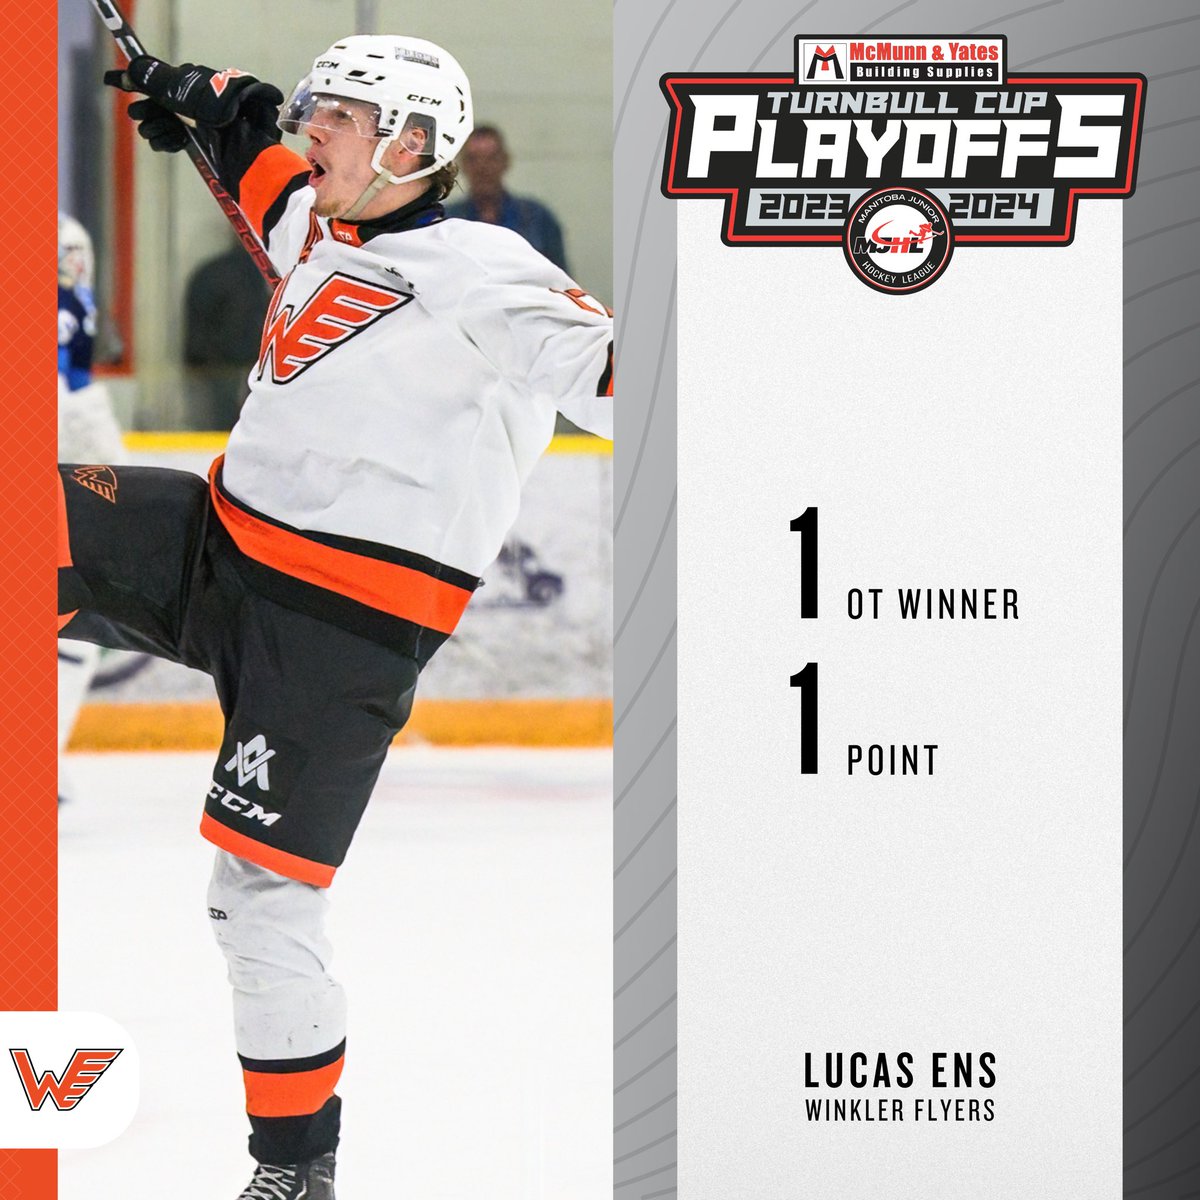 Hometown hero status achieved ☑️ He scored the overtime winner to send the Flyers back home up 3-0 with a chance to win it all on Friday 👀 ⬇️ 📸 @Swatter37 Lucas Ens is your playoff performer of the night for April 23rd. @McMunnandYates #TurnbullCupPlayoffs